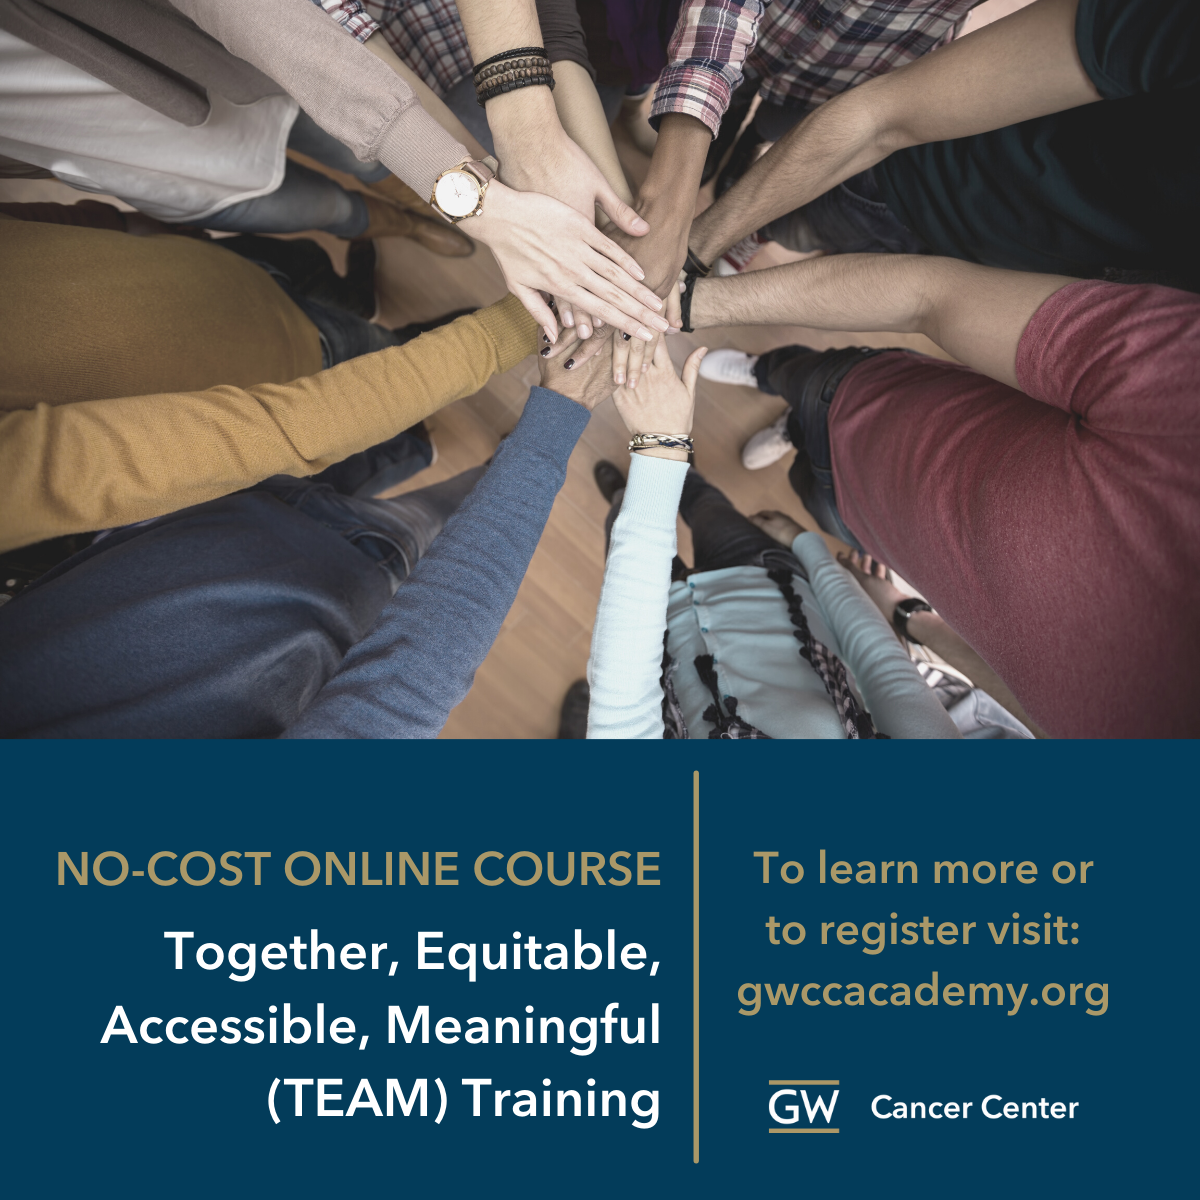 Team huddle with group of hands. Text below reads "Together, Equitable, Accessible, Meaningful (TEAM) Training"